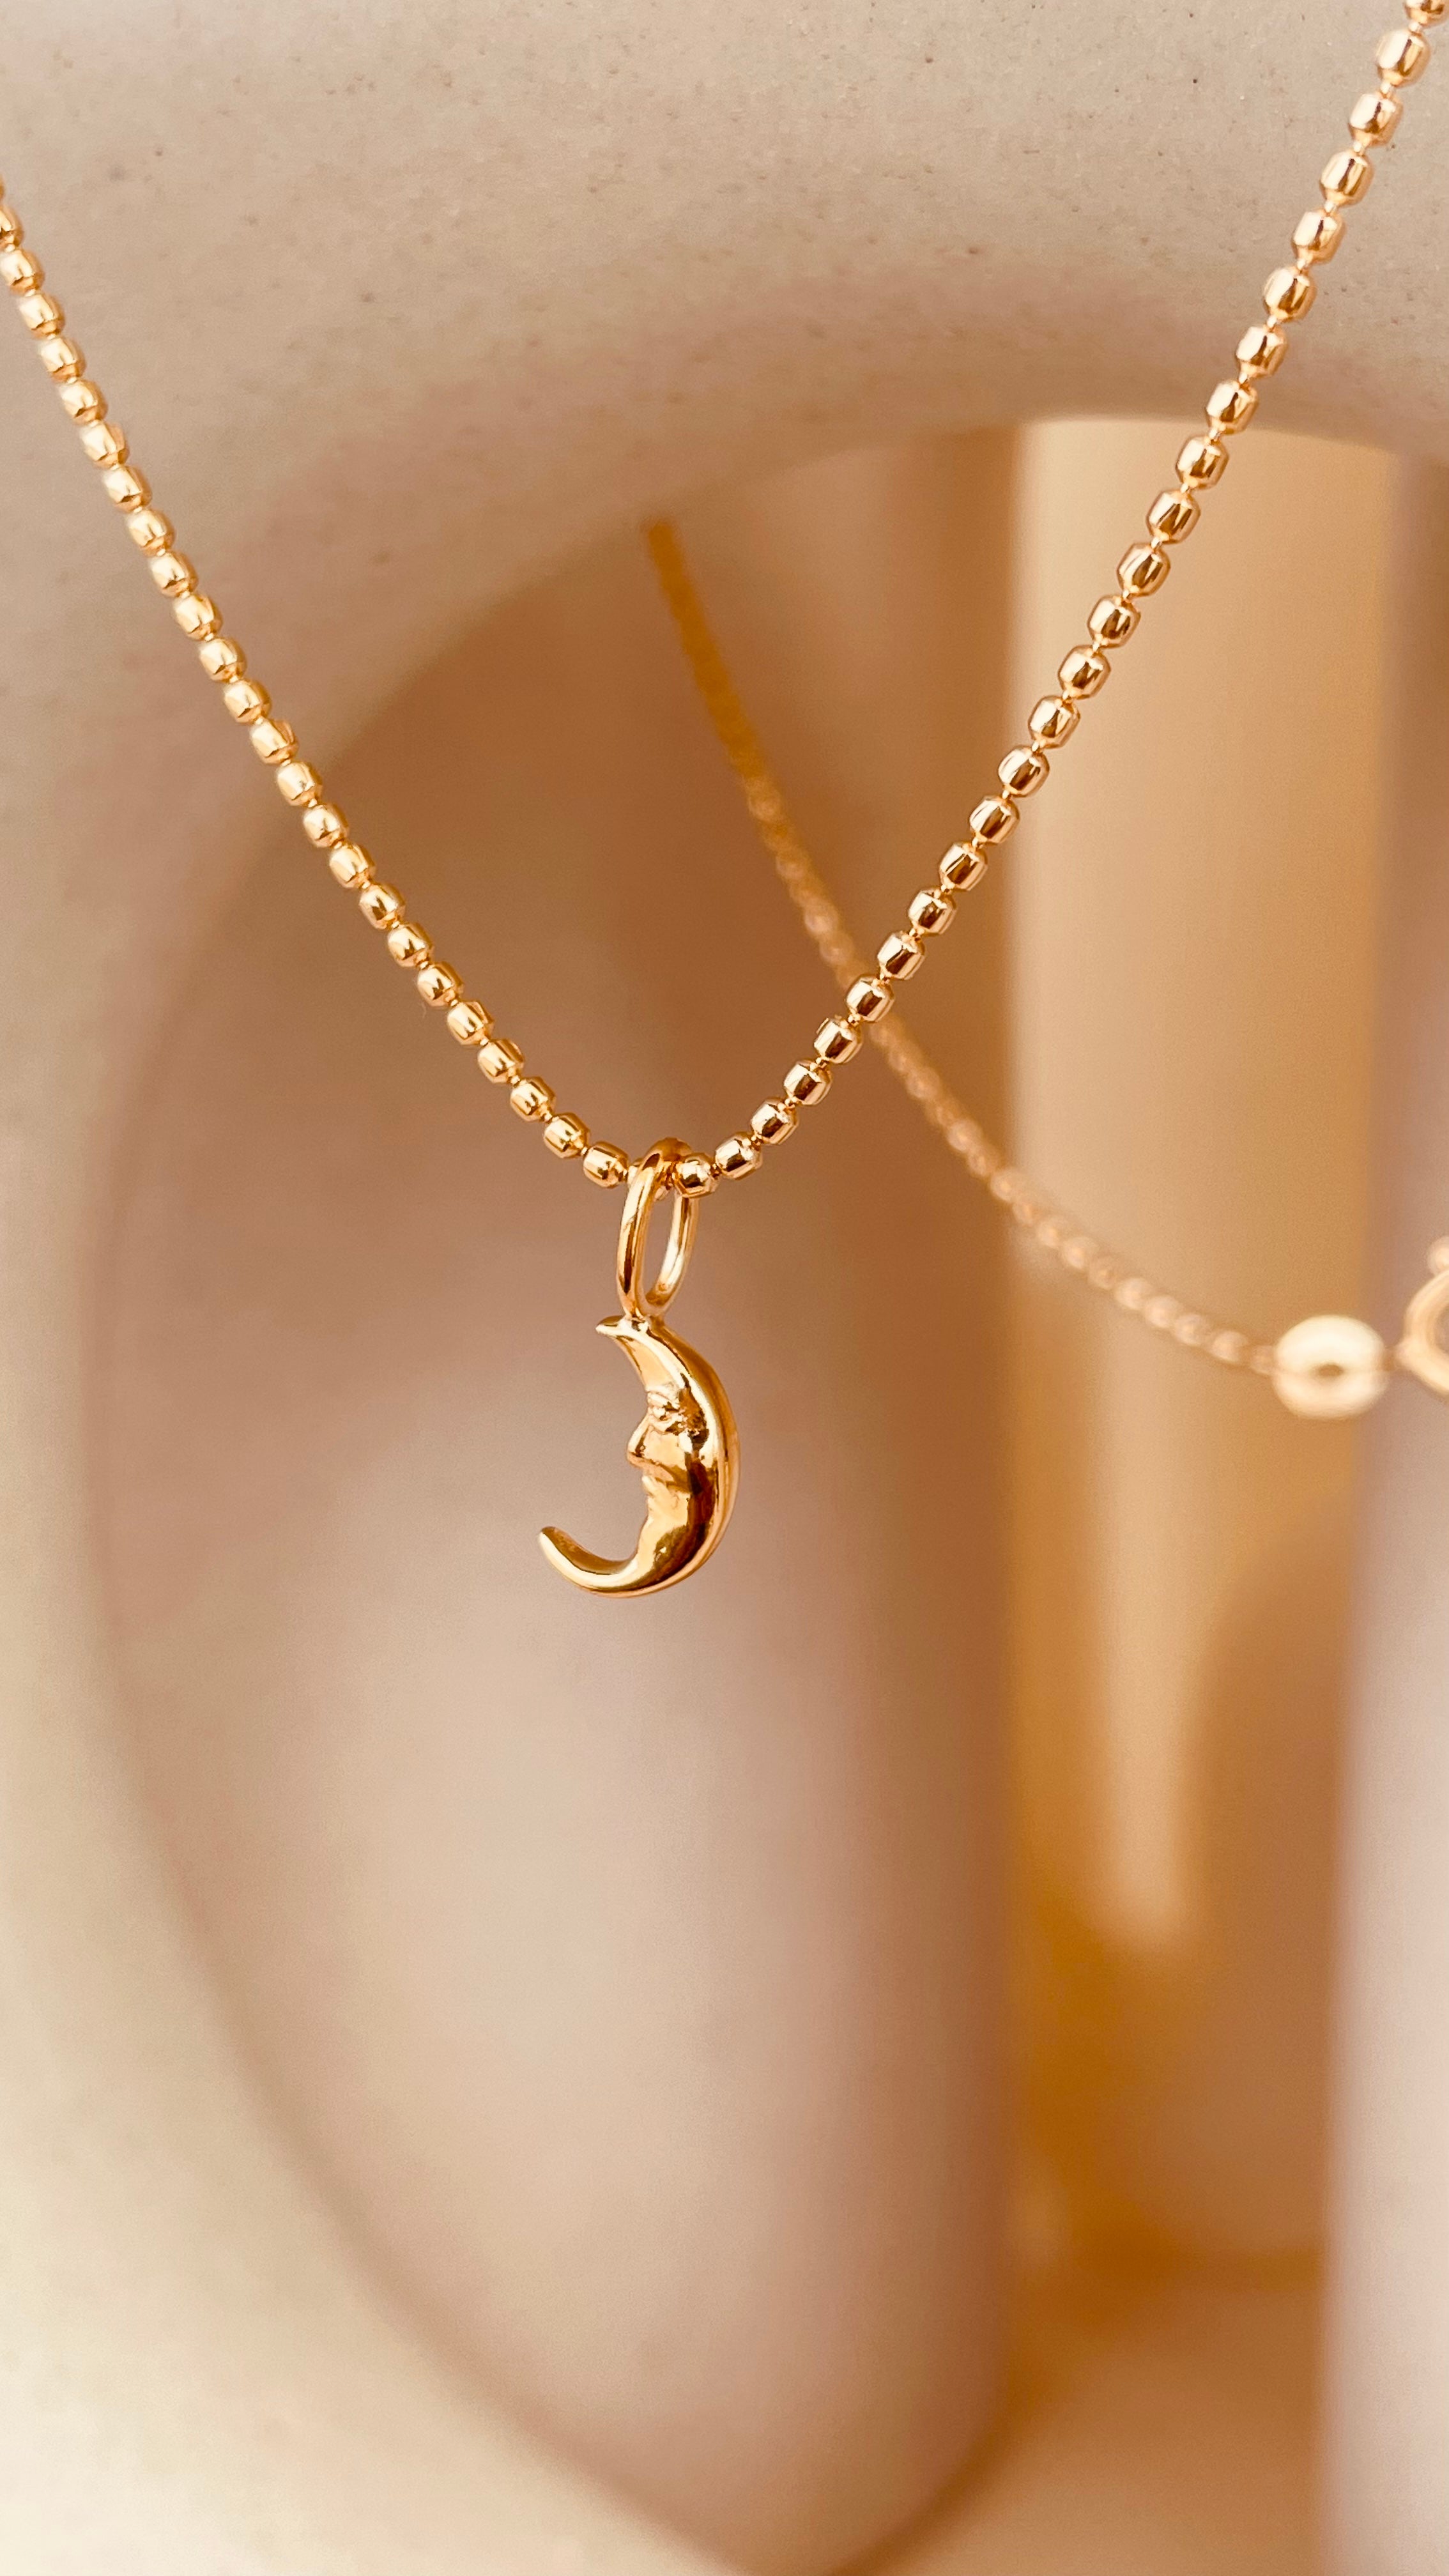 Crescent Moon Necklace with Faceted Ball Chain - Octonov 